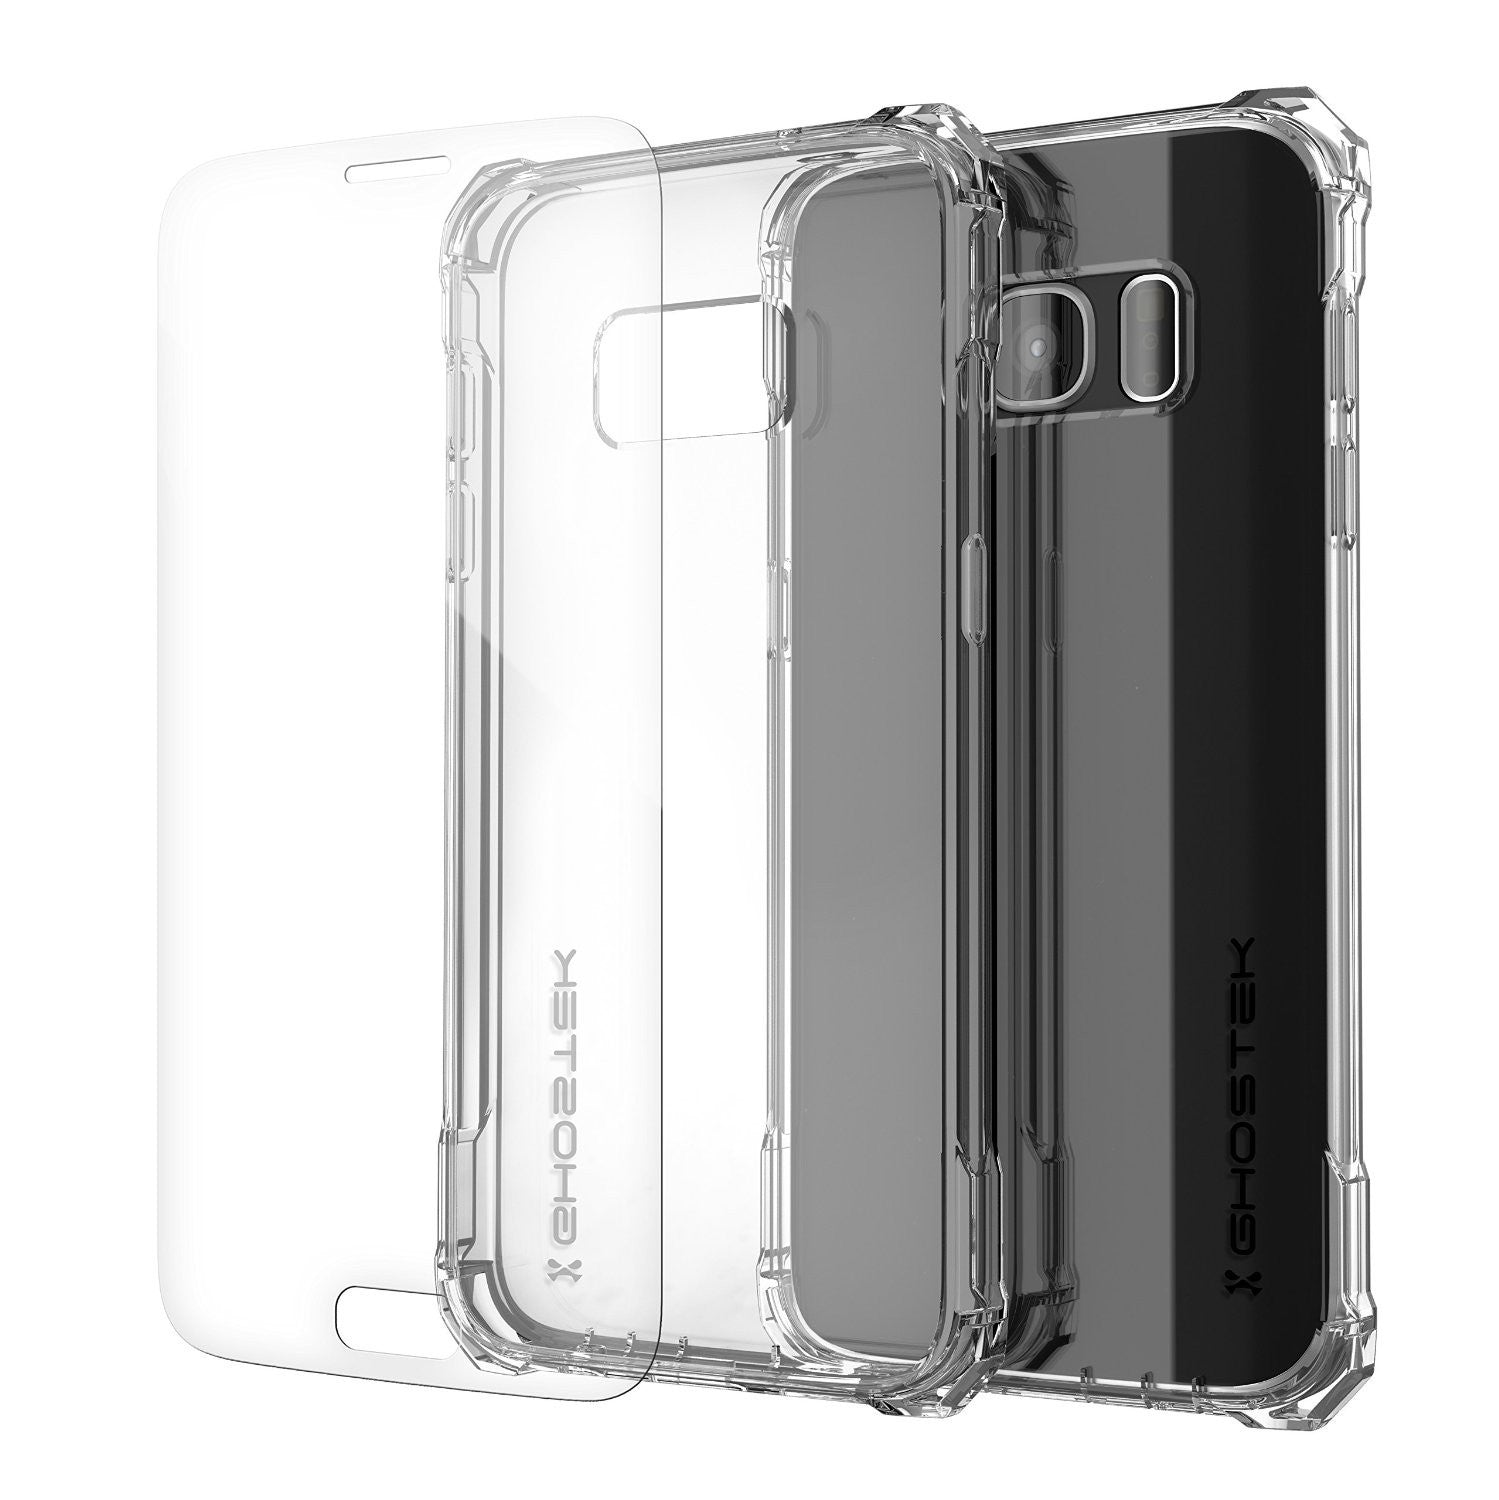 Galaxy S7 Case, Ghostek® Covert Clear Series w/ Premium Impact Cover Screen Protector | Warranty (Color in image: Clear)